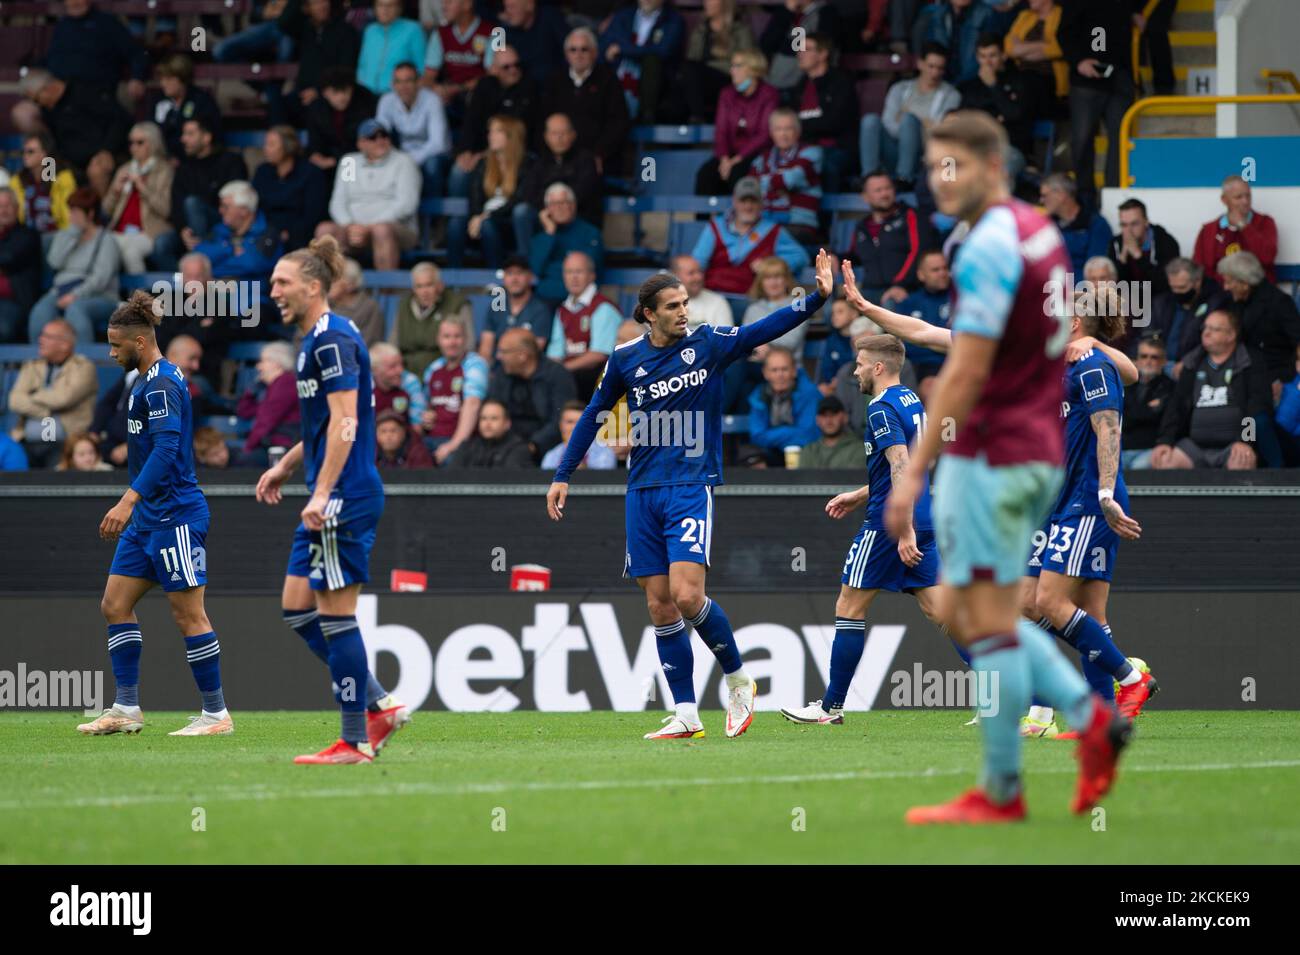 Patrick Bamford of Leeds United scores his team's first goal during the Premier League match between Burnley and Leeds United at Turf Moor, Burnley, UK on 29th August 2021. (Photo by Pat Scaasi/MI News/NurPhoto) Stock Photo